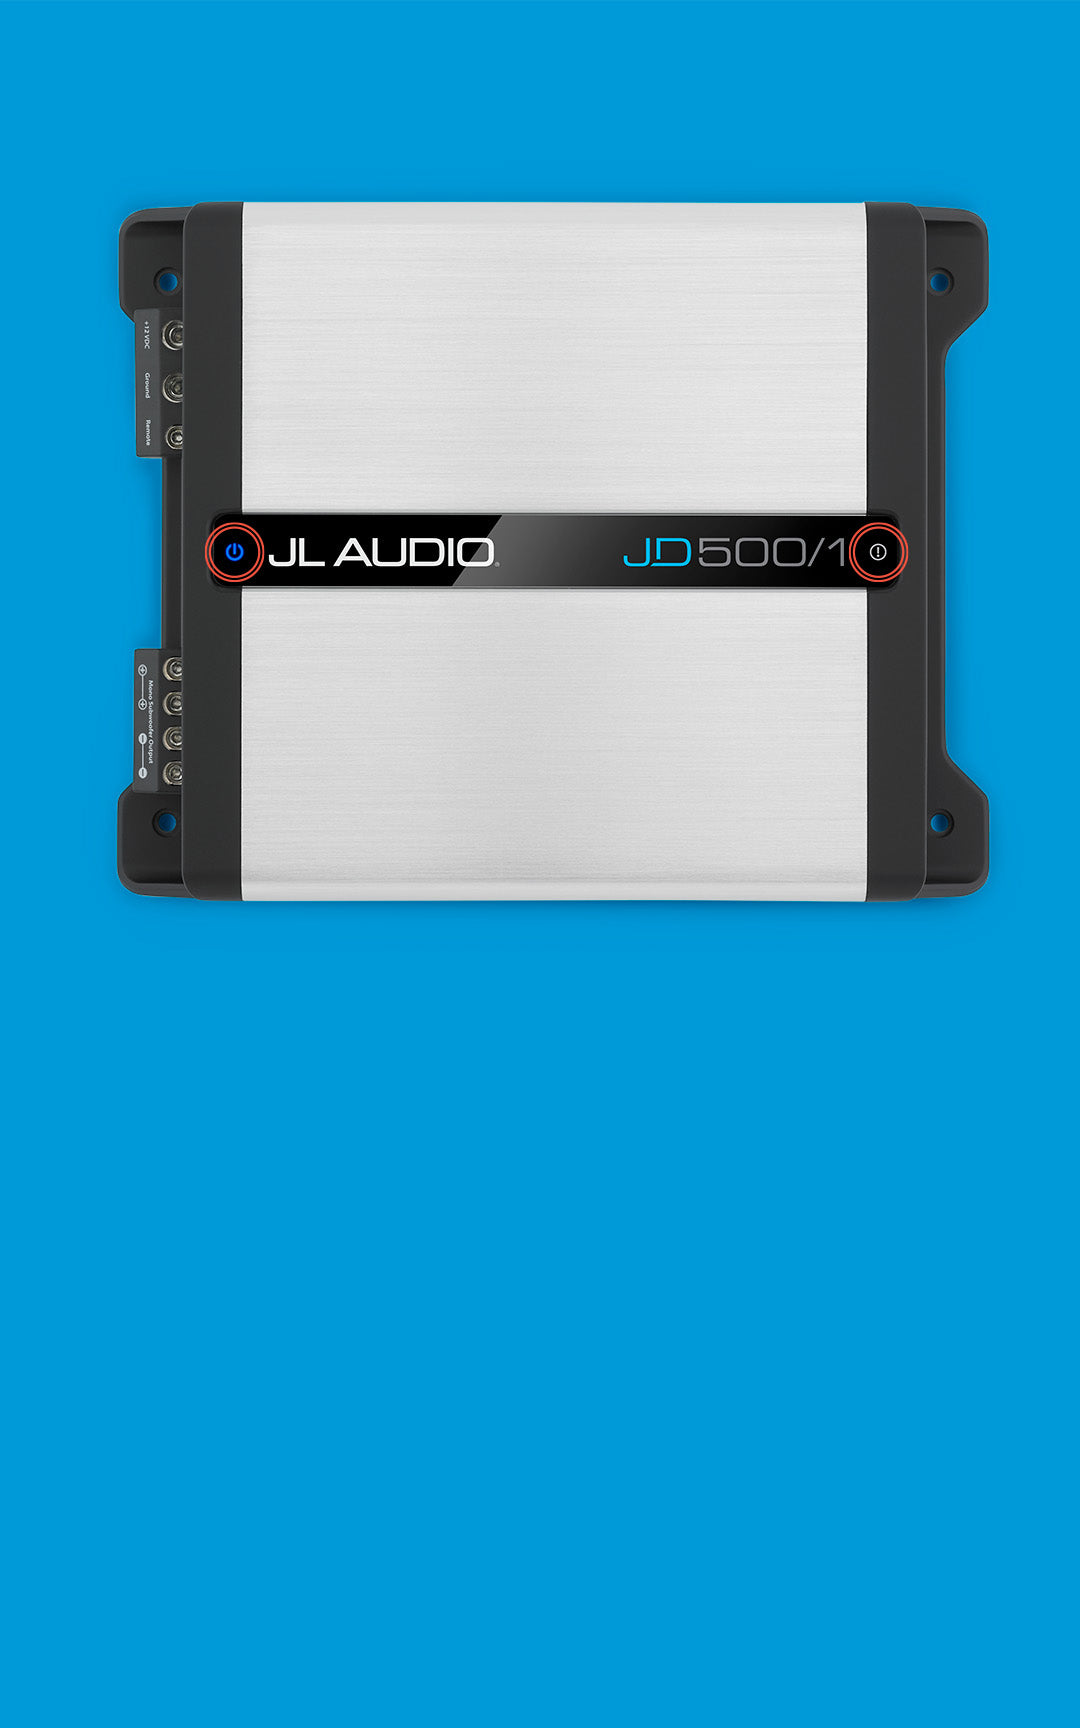 A JD500/1 amplifier highlighting dual LED feature on a vibrant blue background.